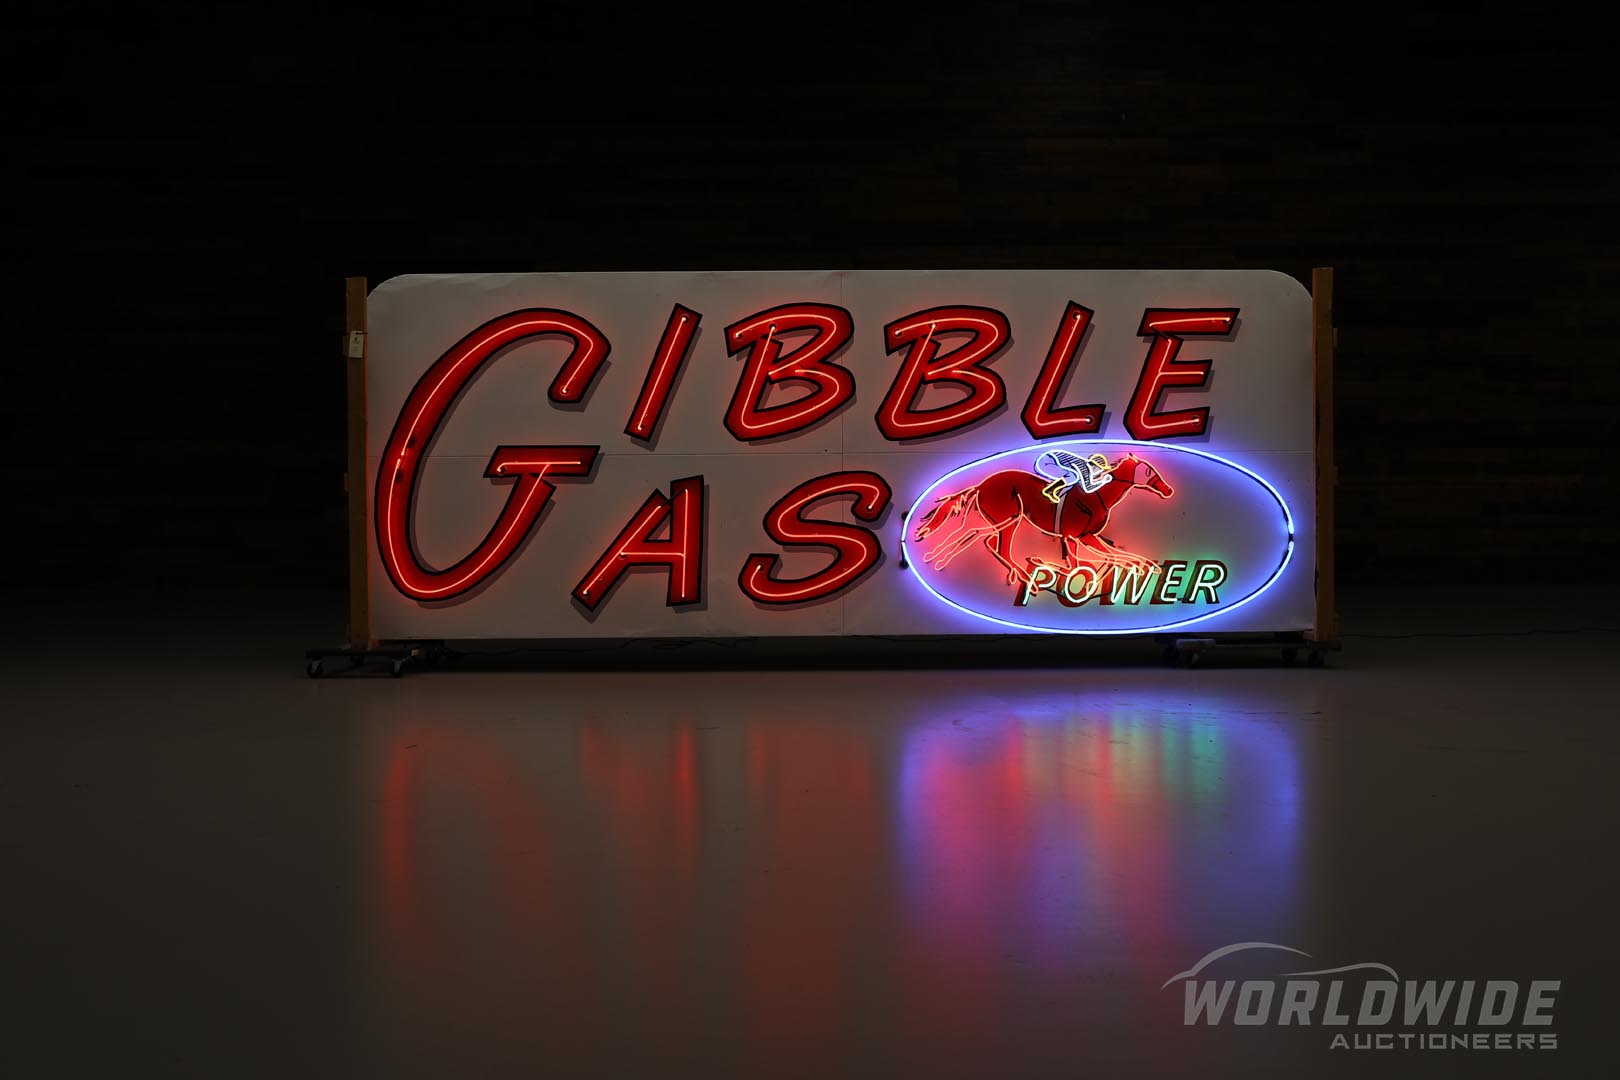 Original Large Gibble Gas Animated Neon Sign